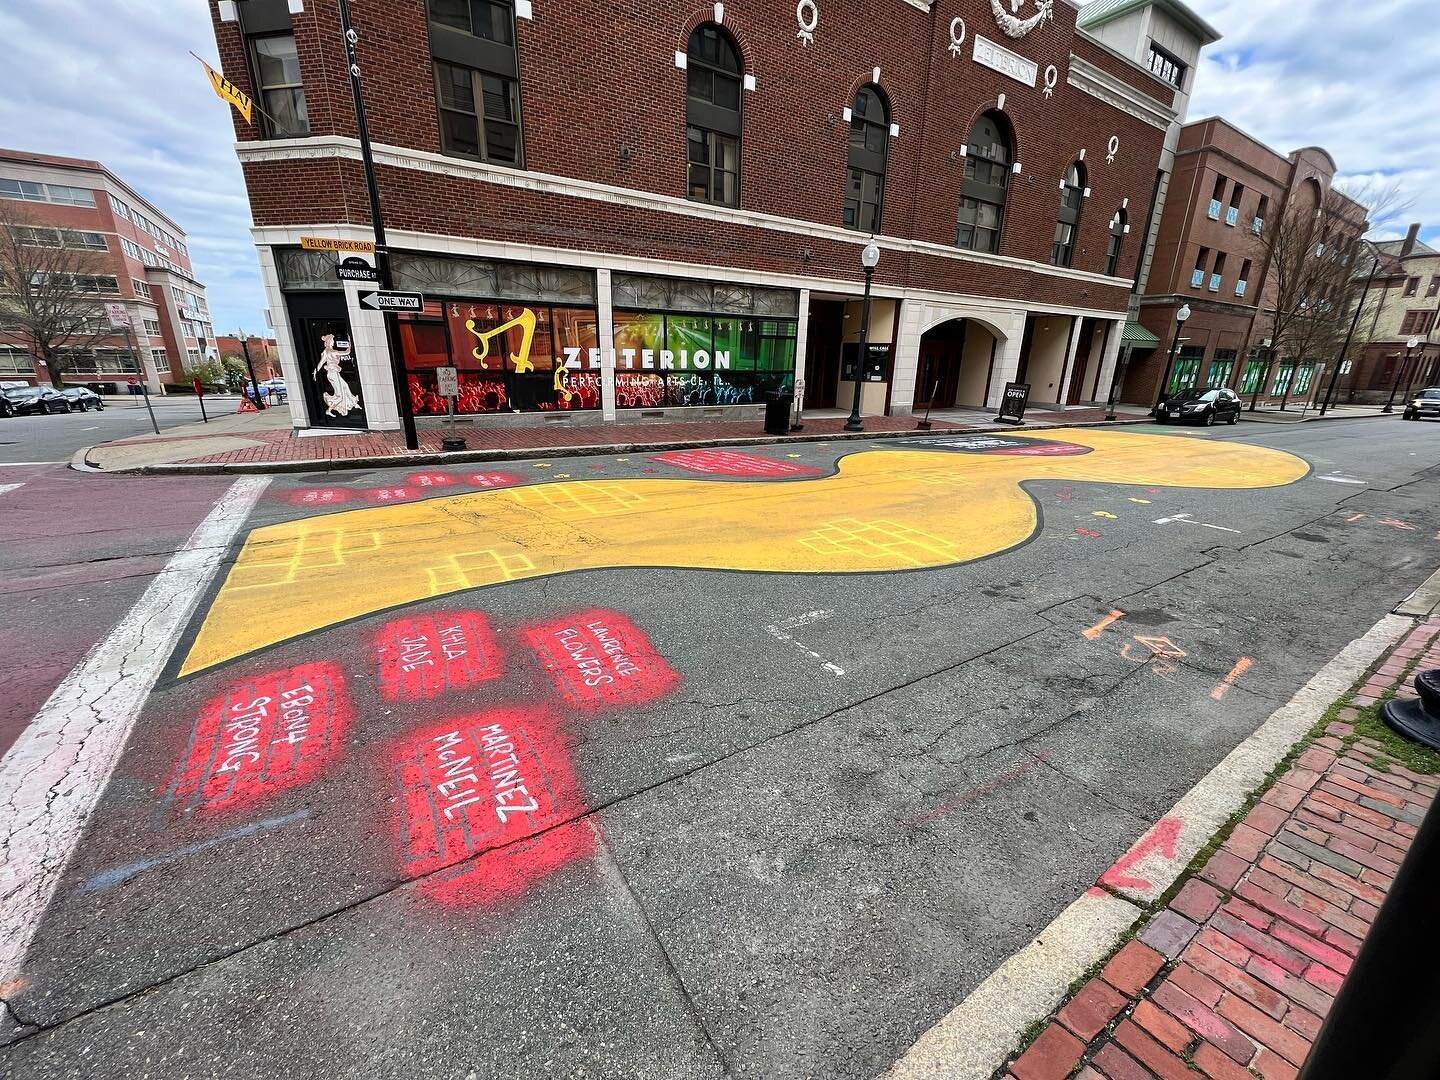 Amazingly cool street art outside the theatre! #wehaveayellowbrickroad #easeondowntheroad #thewiz #nbft #thezeiterion #lightingdesign